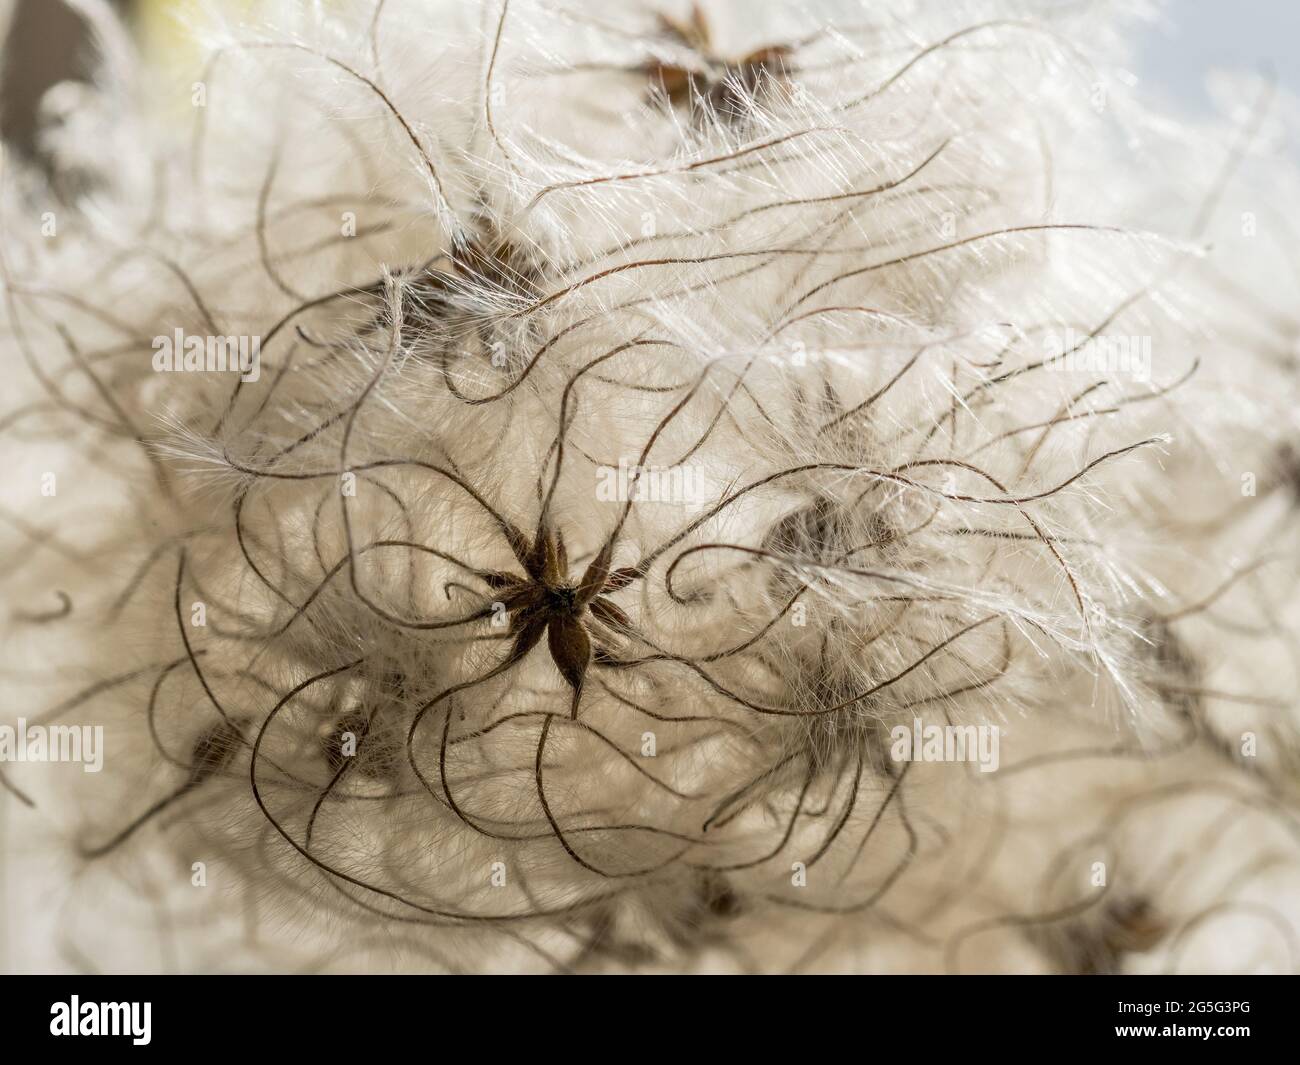 a full frame close up macro detail view of elegant delicate clemetis fluffly puffball seedhead seed head seeds with tendrills tails waving curling bac Stock Photo